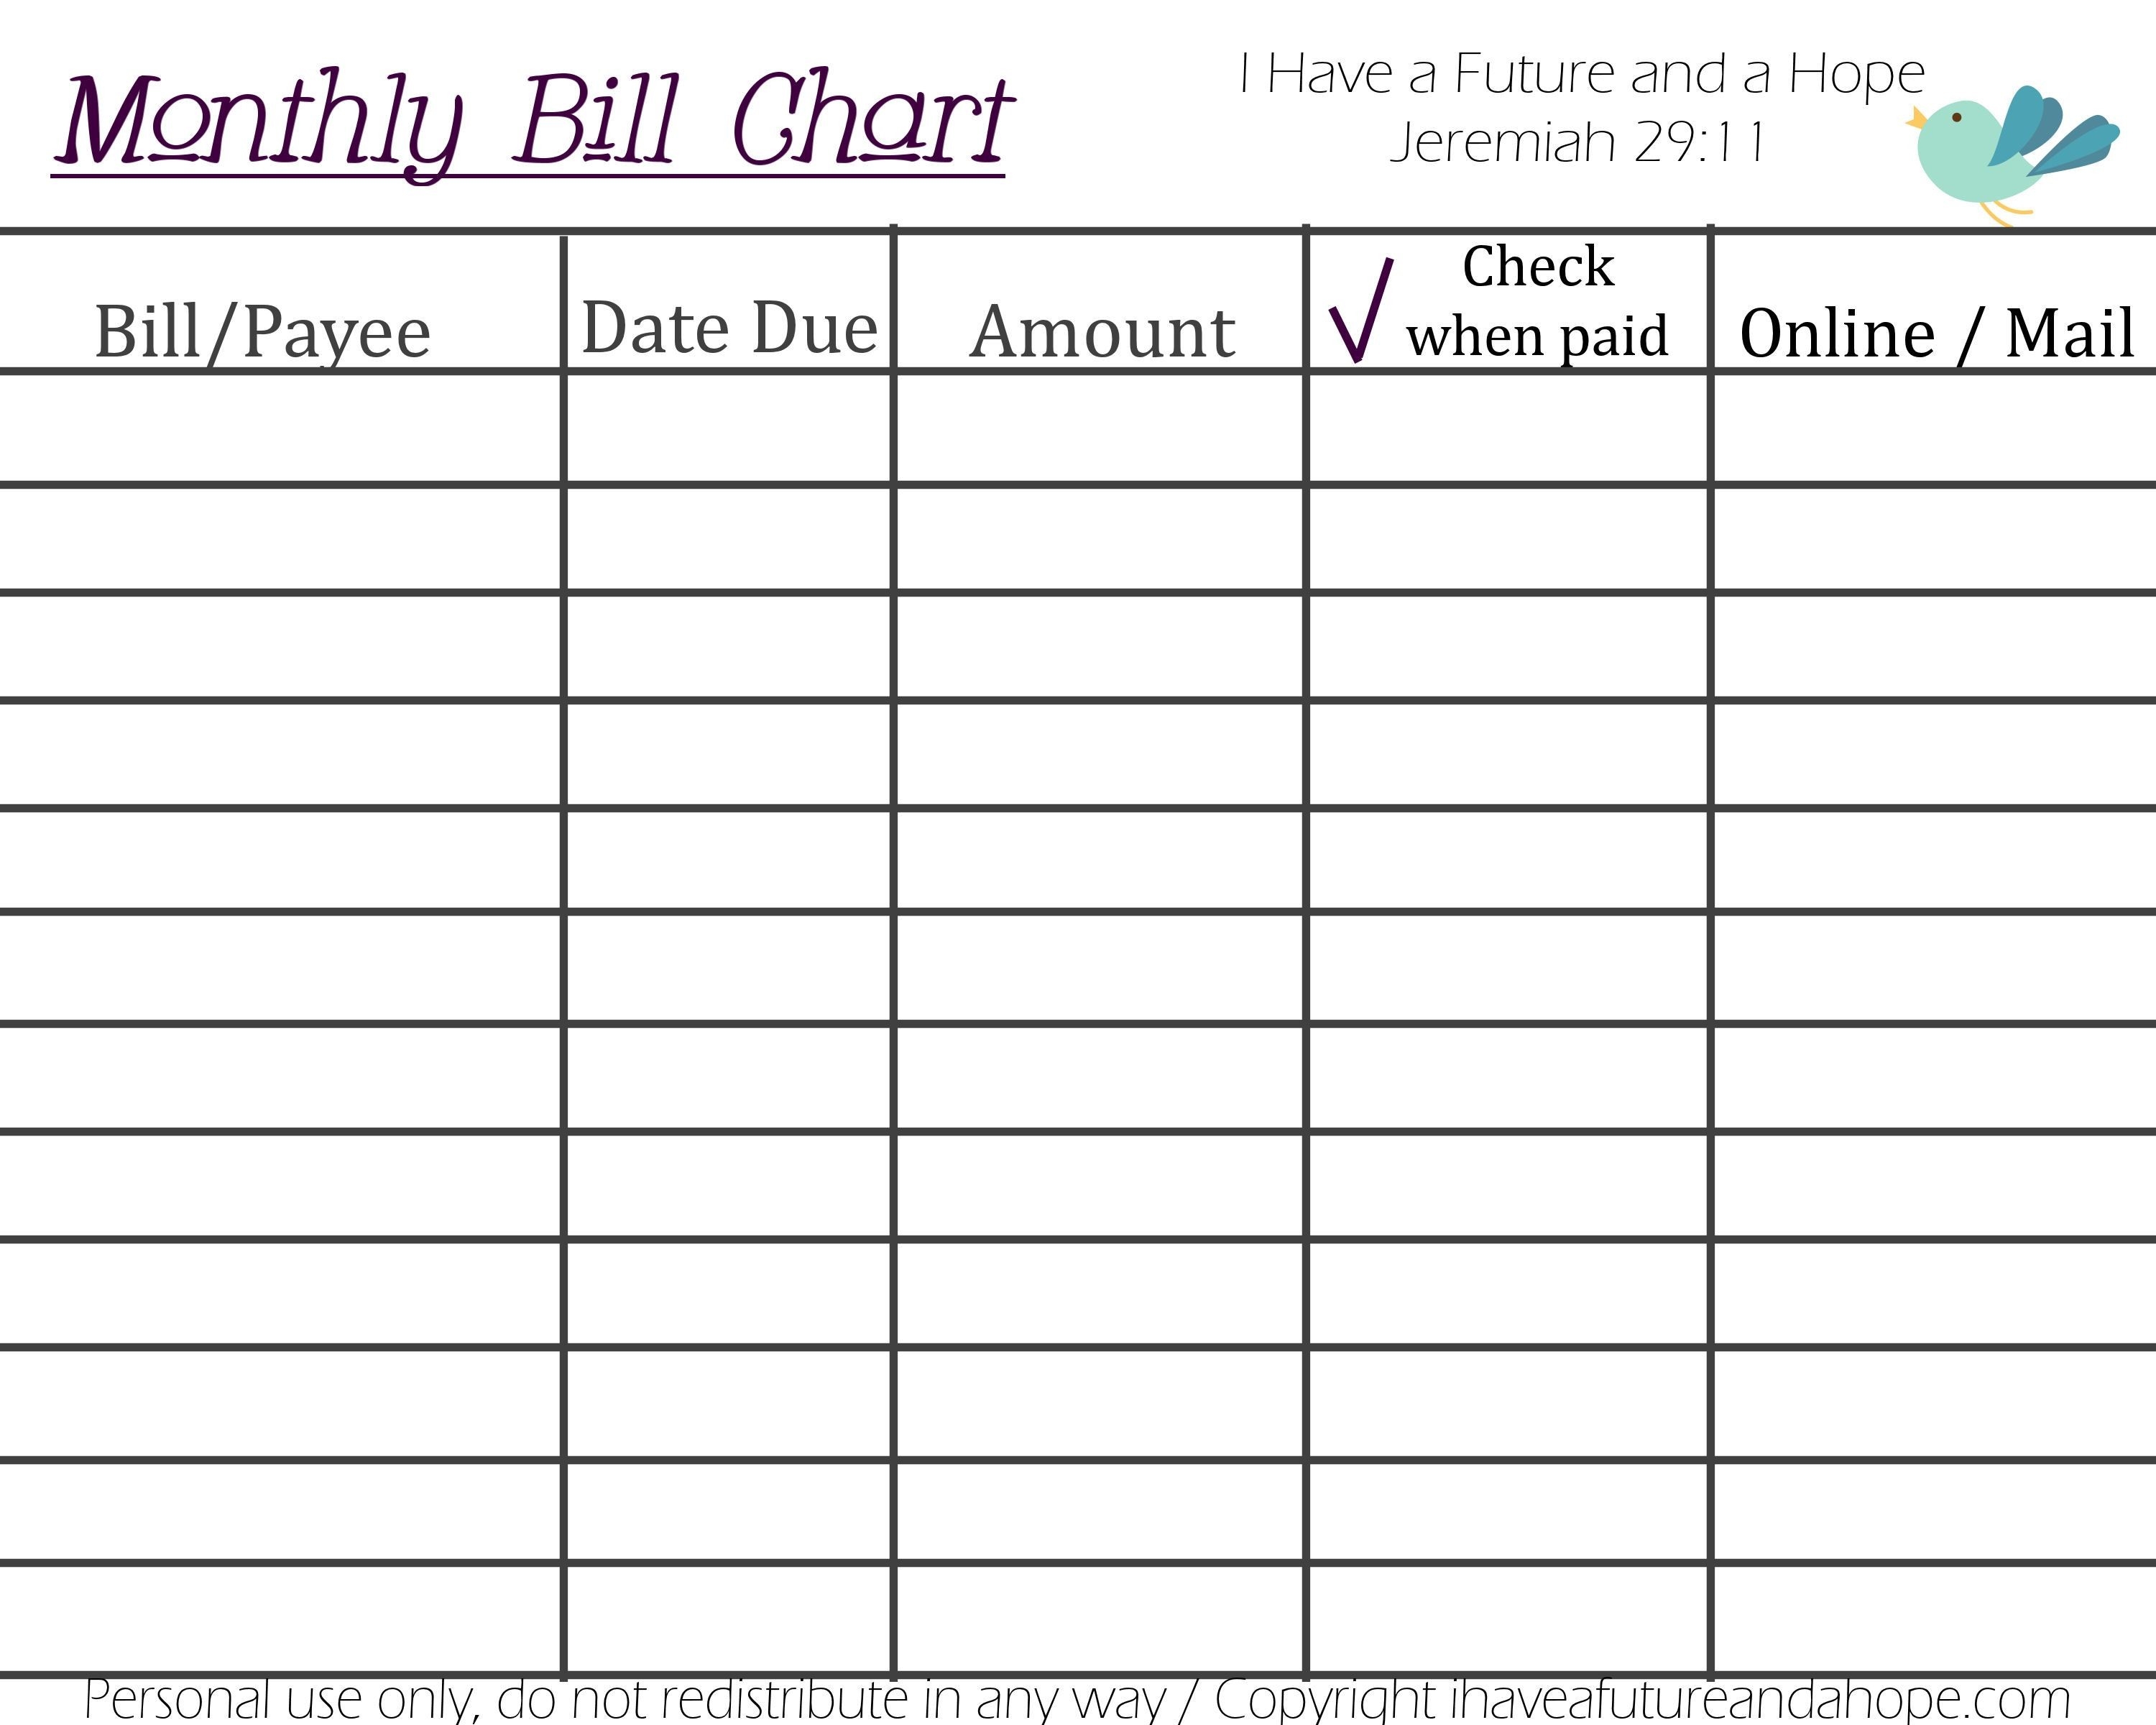 Printable Monthly Bill Chart | Budgeting Ideas | Bill-Printable Monthly Bill Charts